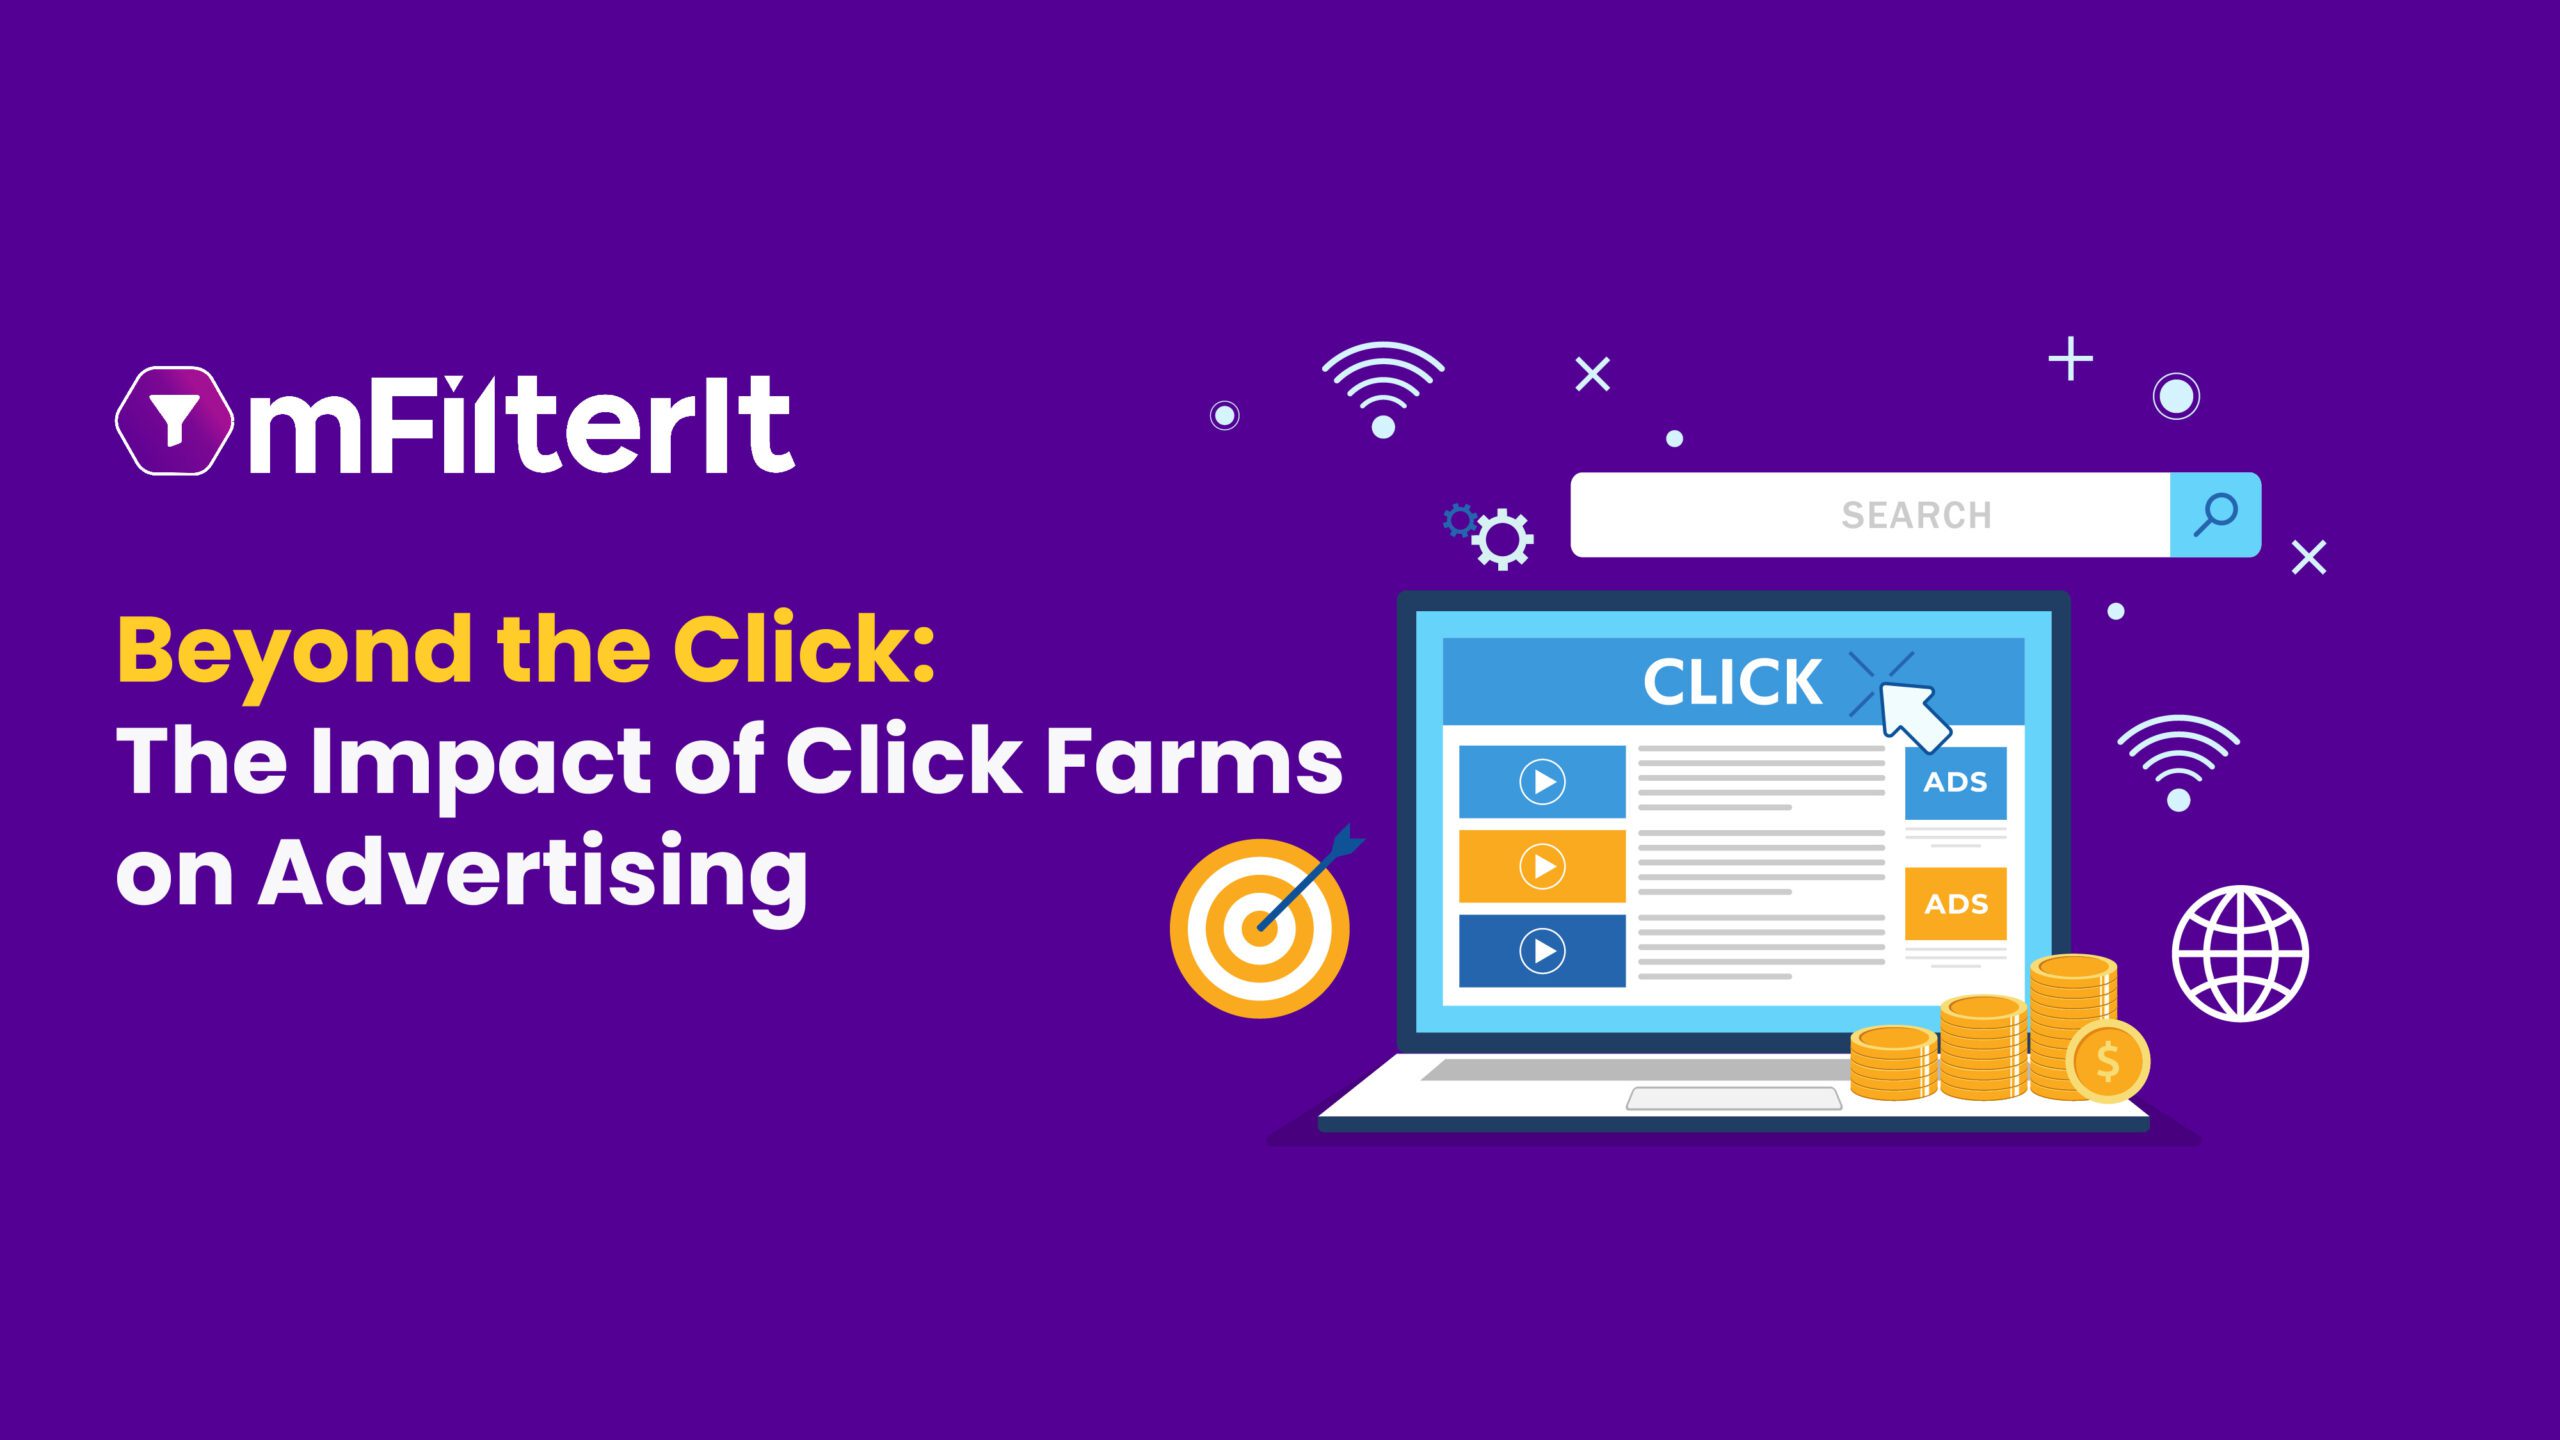 beyond the click: the impact of click farms on advertising